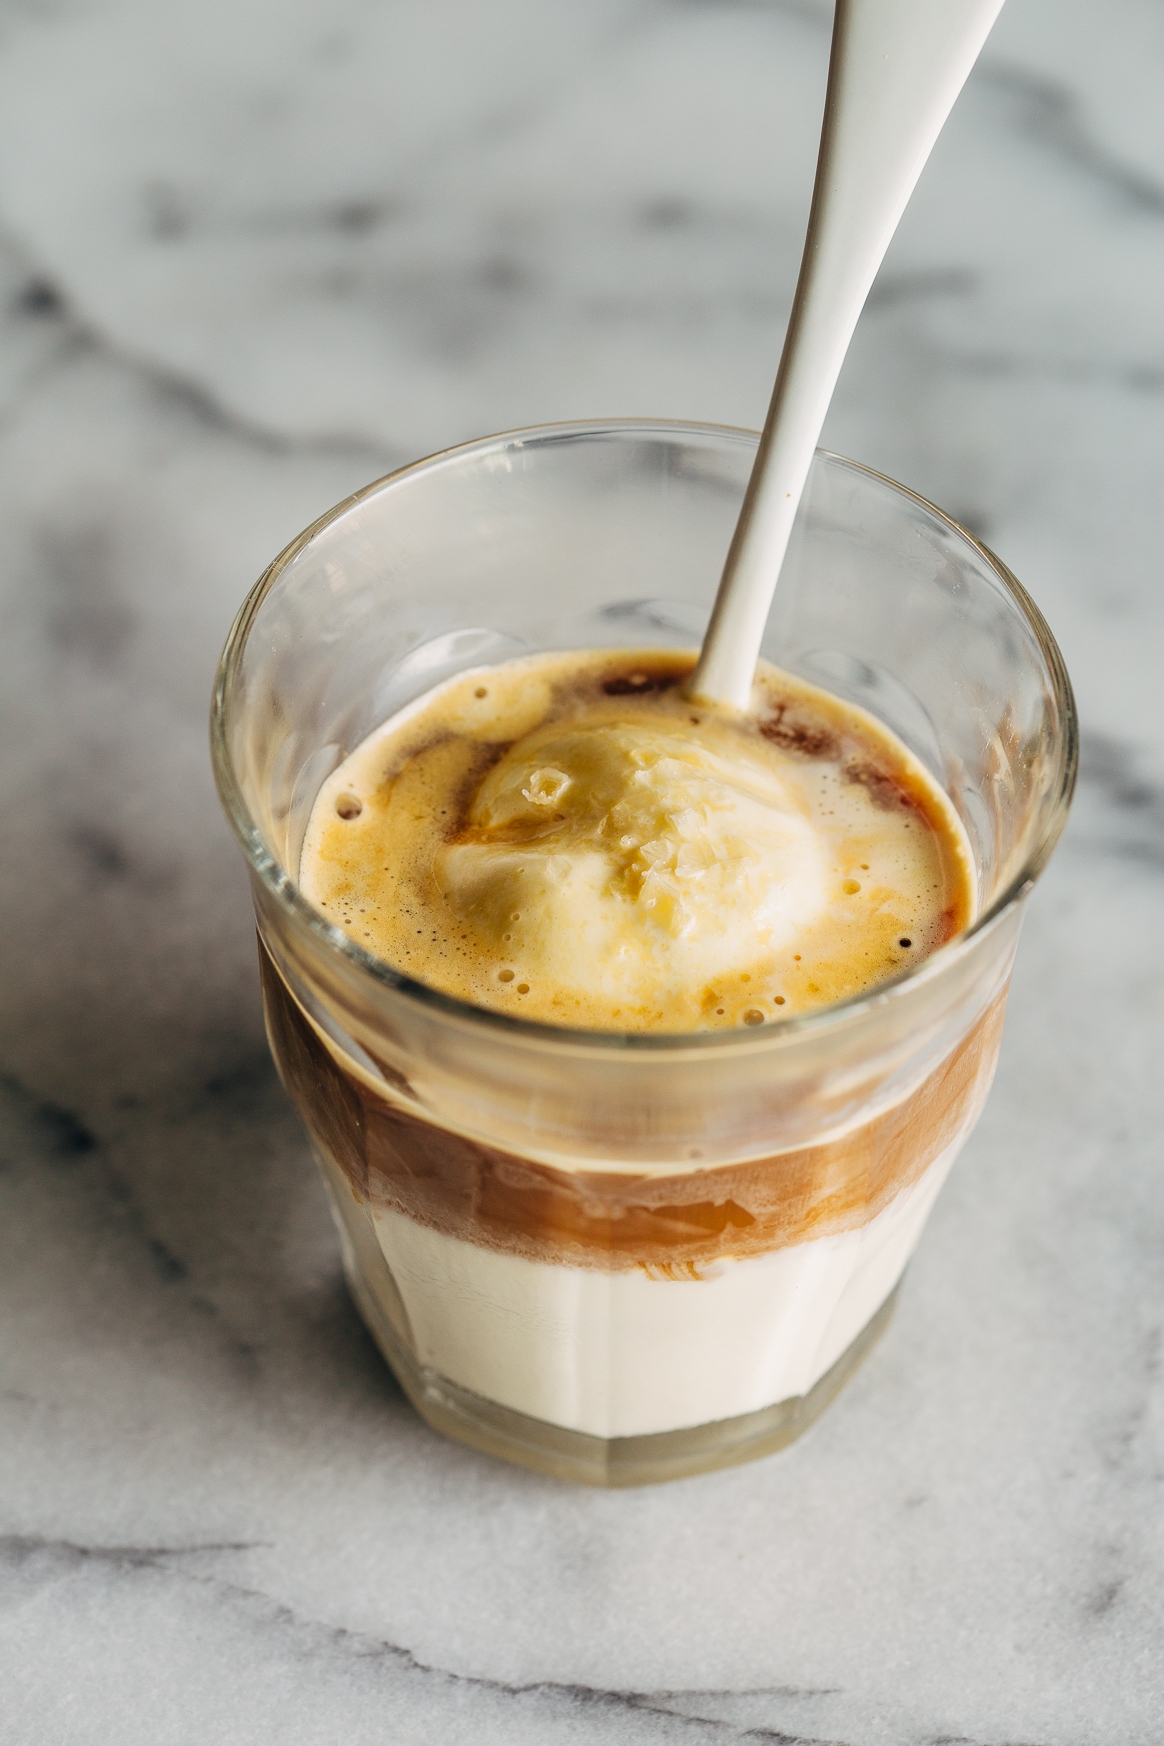 How To Make an Affogato at Home, Step by step Recipe